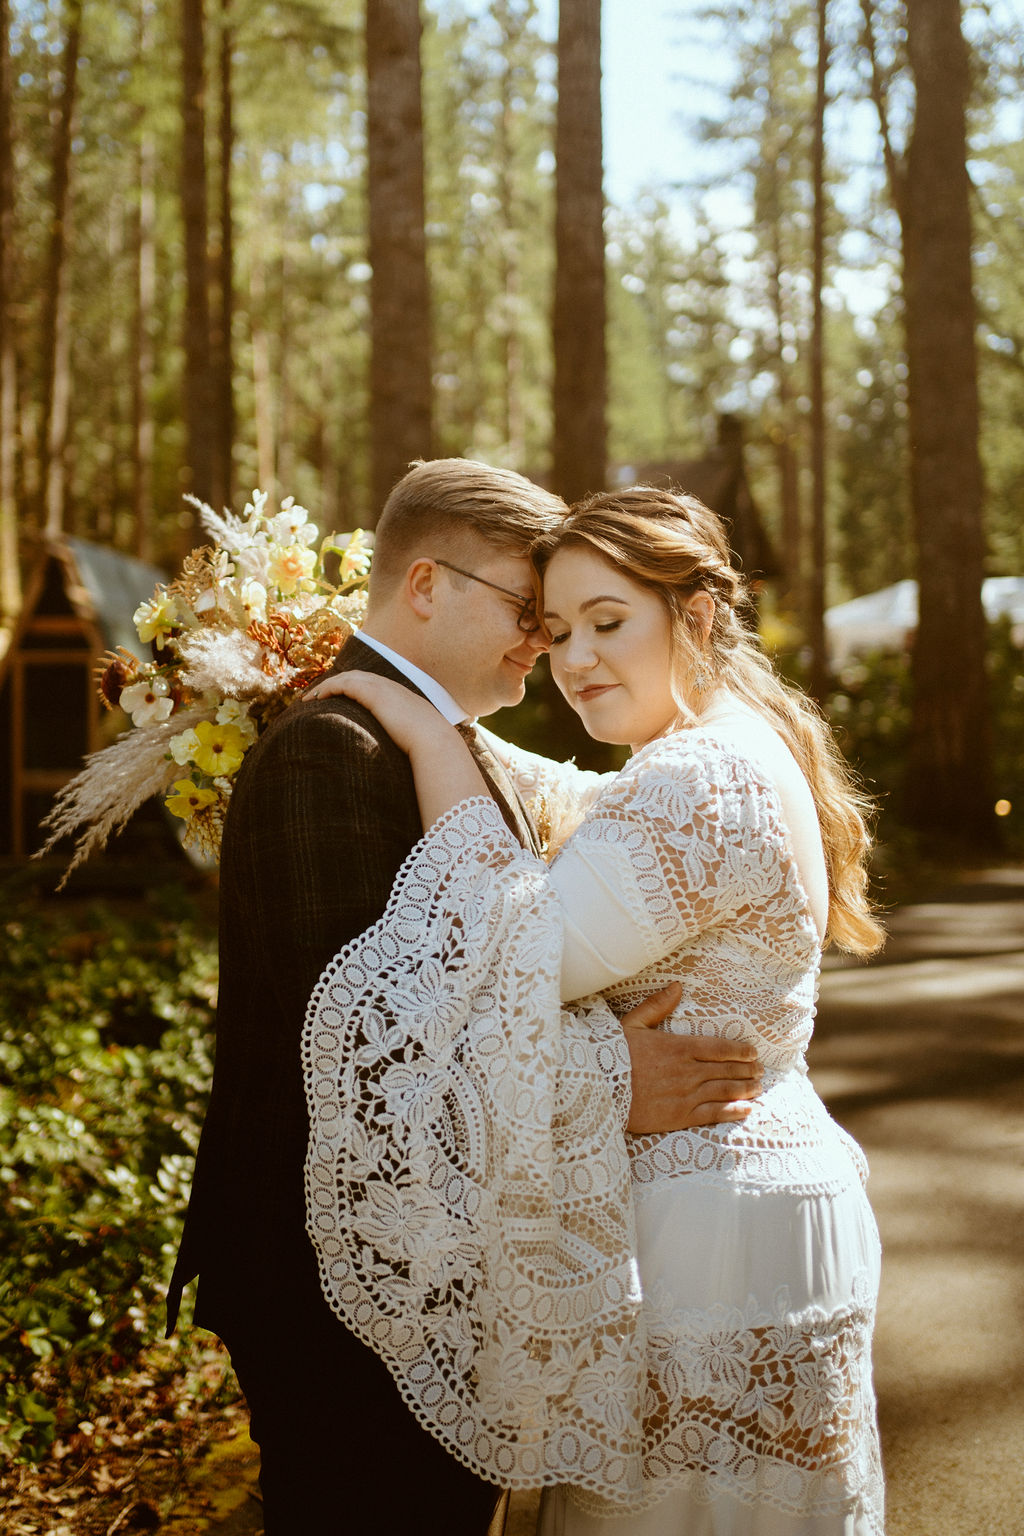 The couple poses on the side of the road with the bride facing the camera and the groom gently resting his head on her head